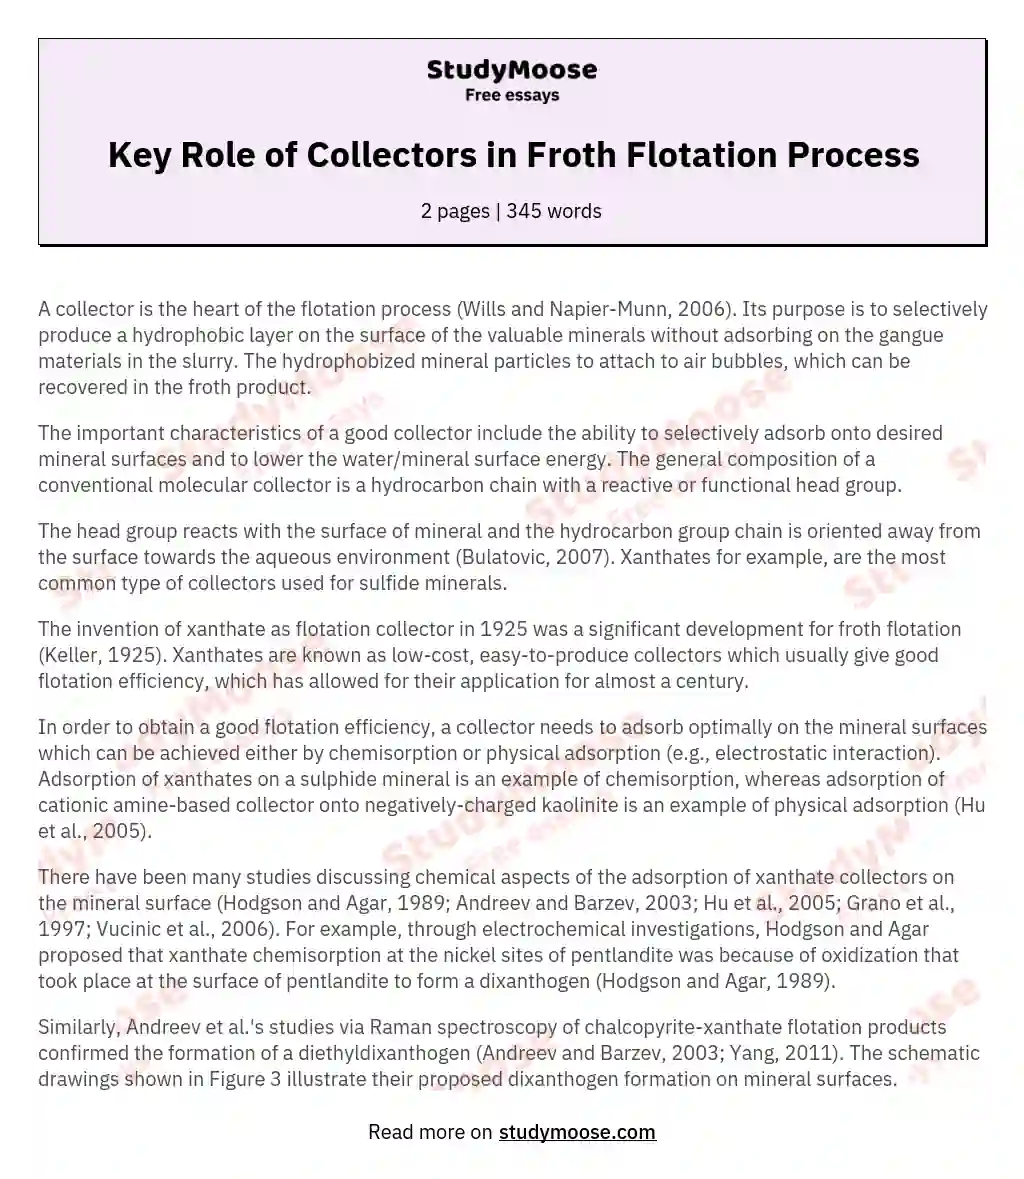 Key Role of Collectors in Froth Flotation Process essay